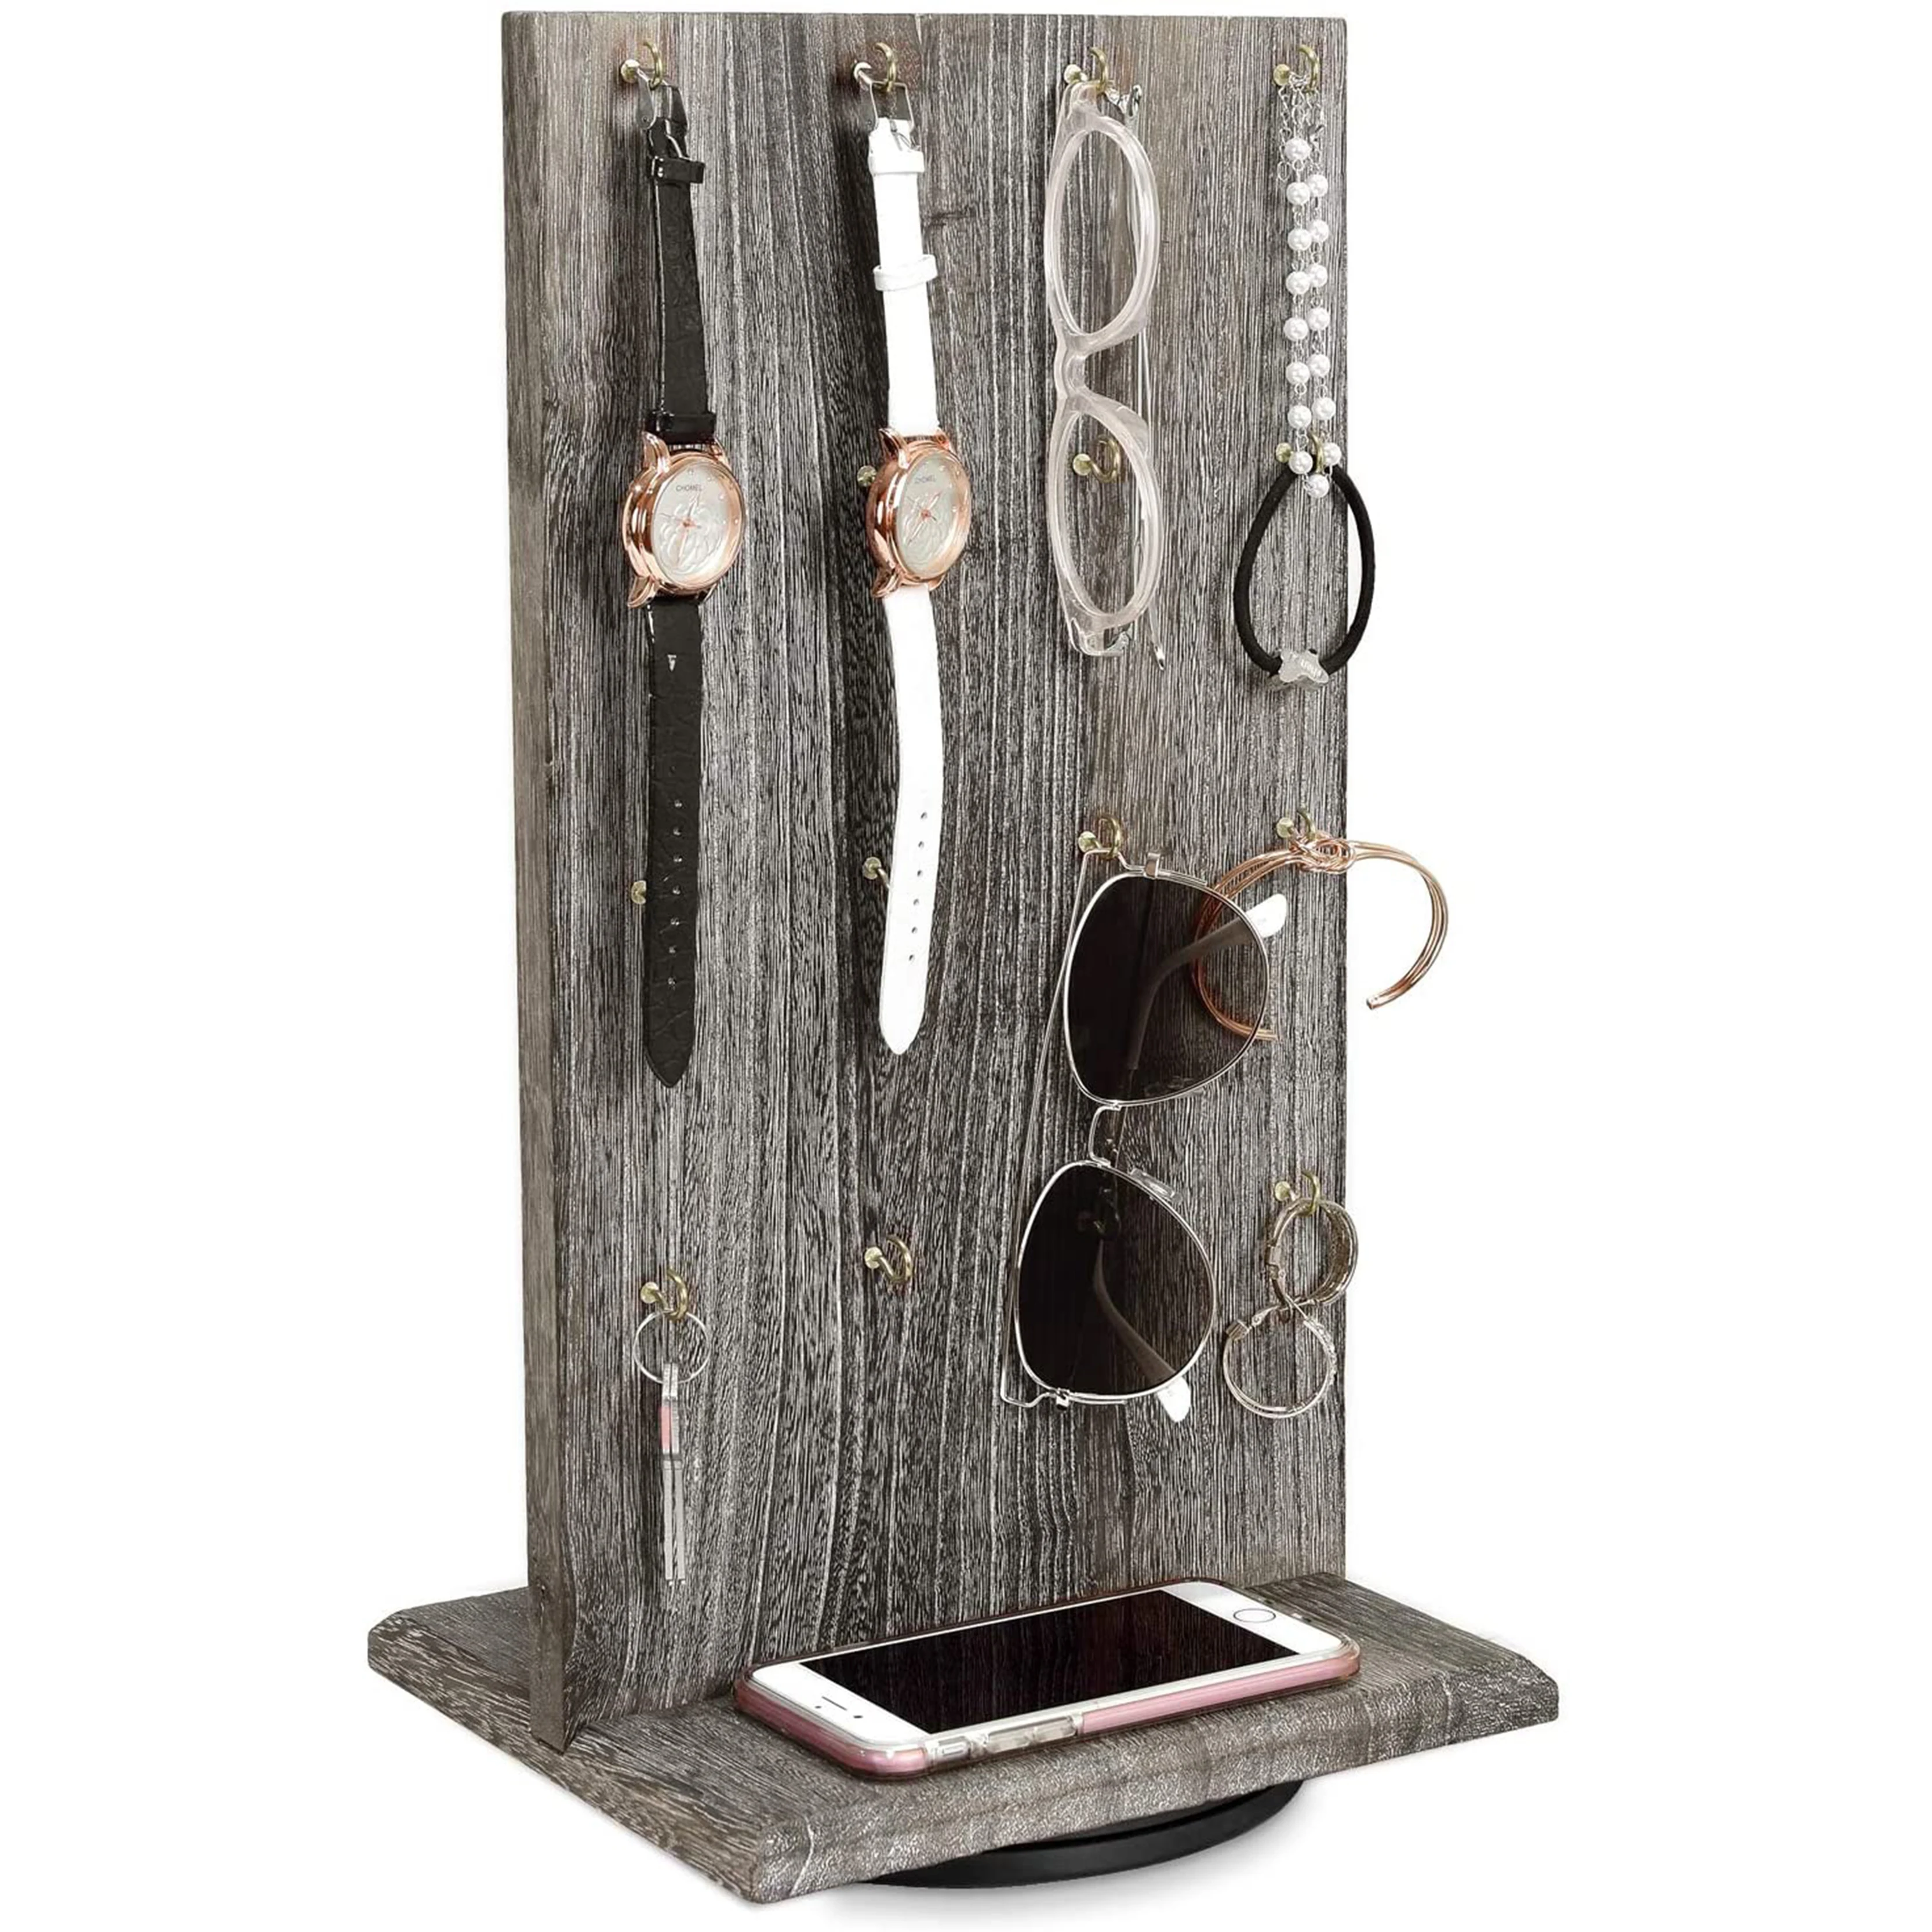 Two-Sided Rotating Rustic Wooden Jewelry Display Stand For Store, Earring Display with Hooks